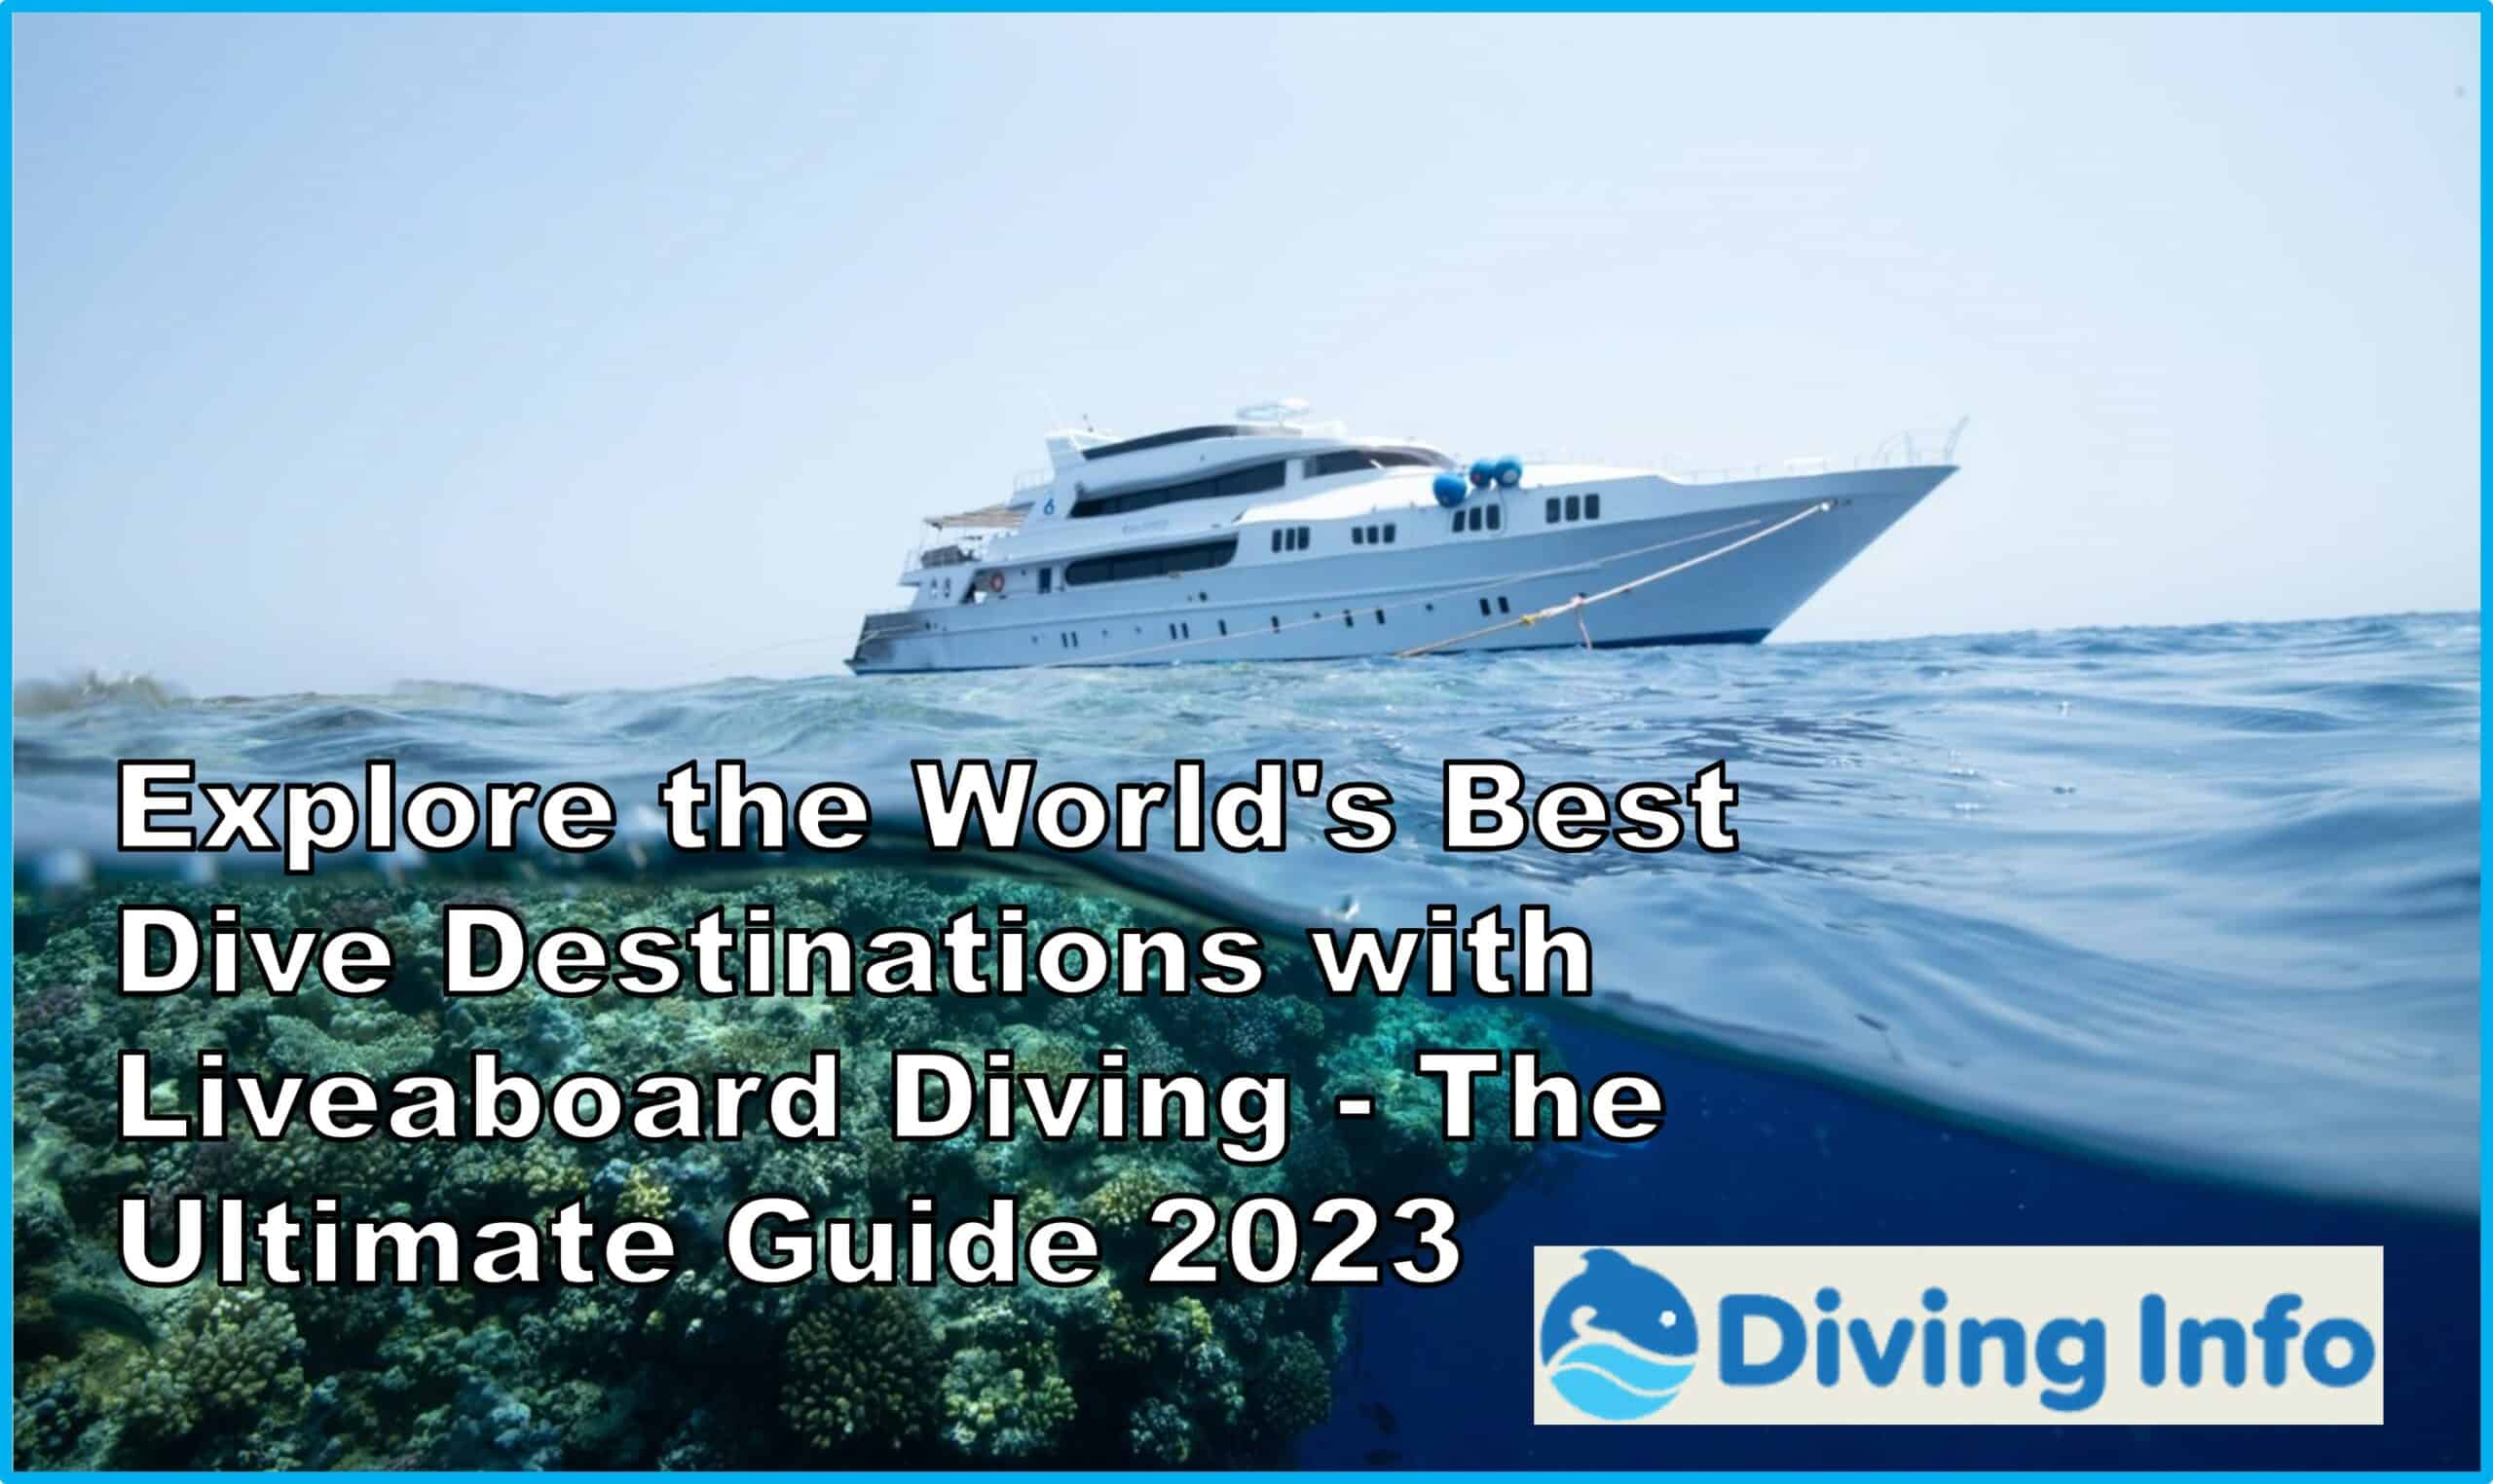 Explore the Worlds Best Dive Destinations with Liveaboard Diving - The Ultimate Guide 2023